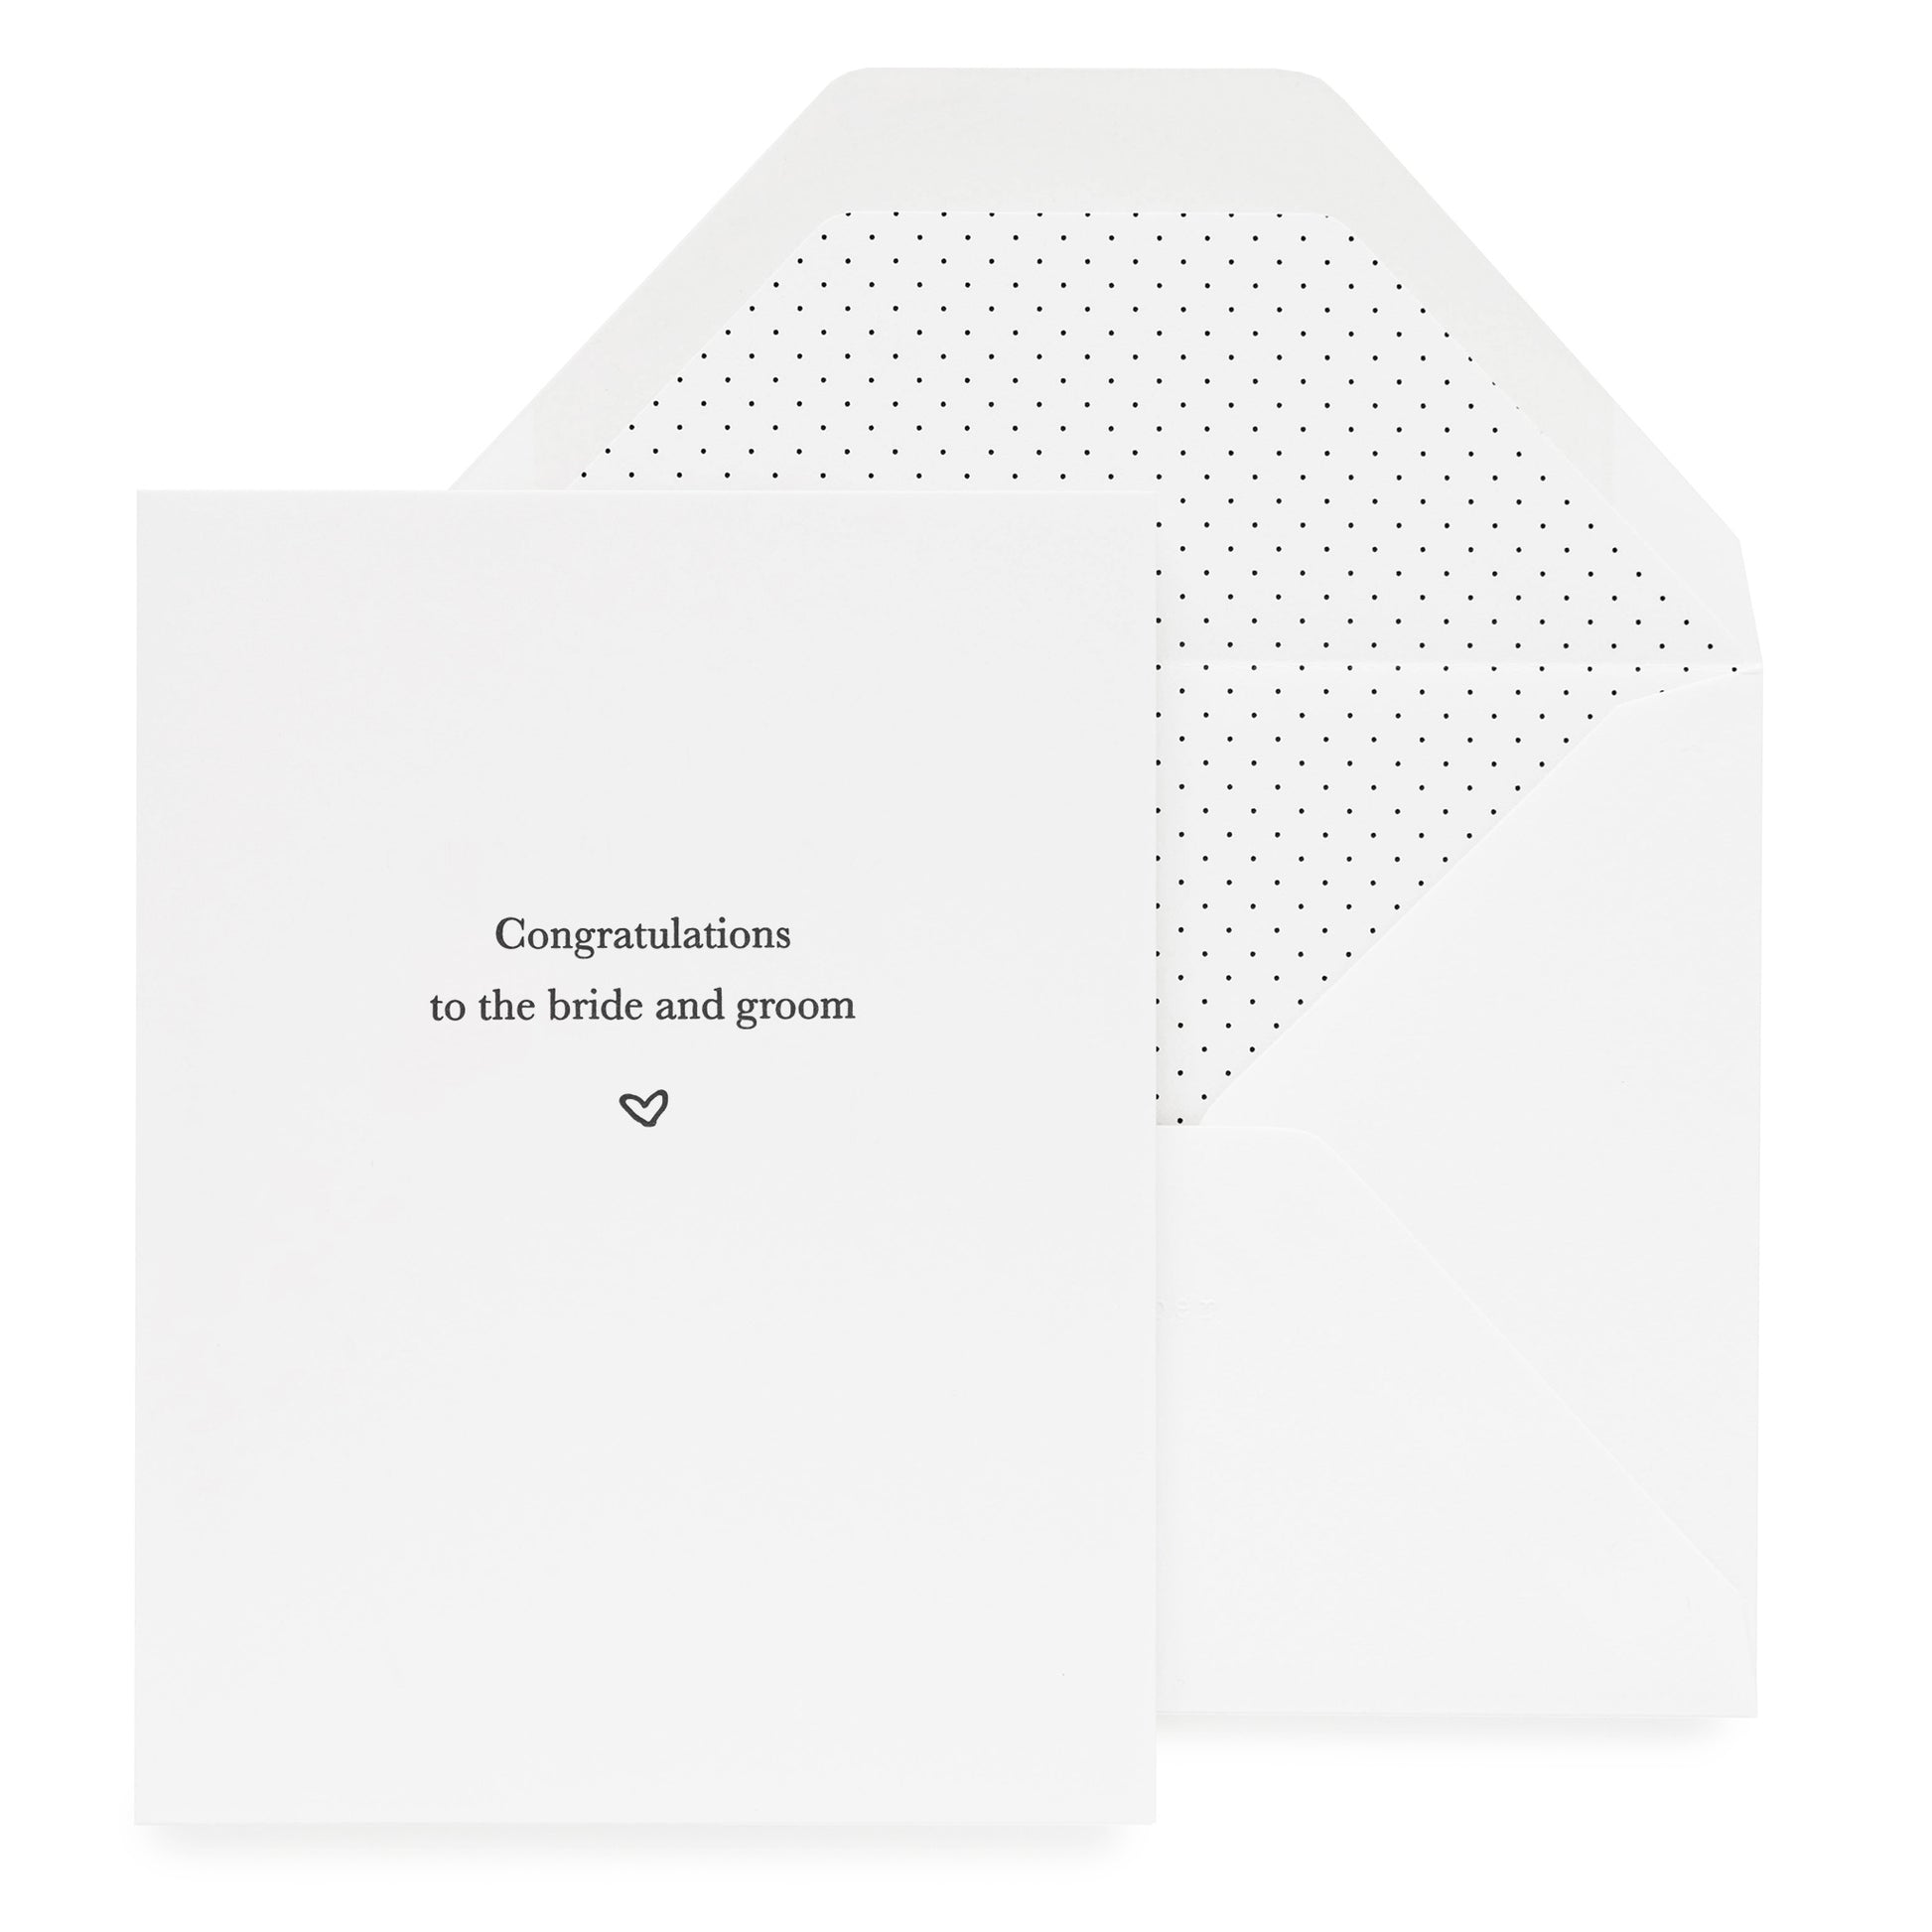 White and black greeting card printed with Congratulations to the bride and groom